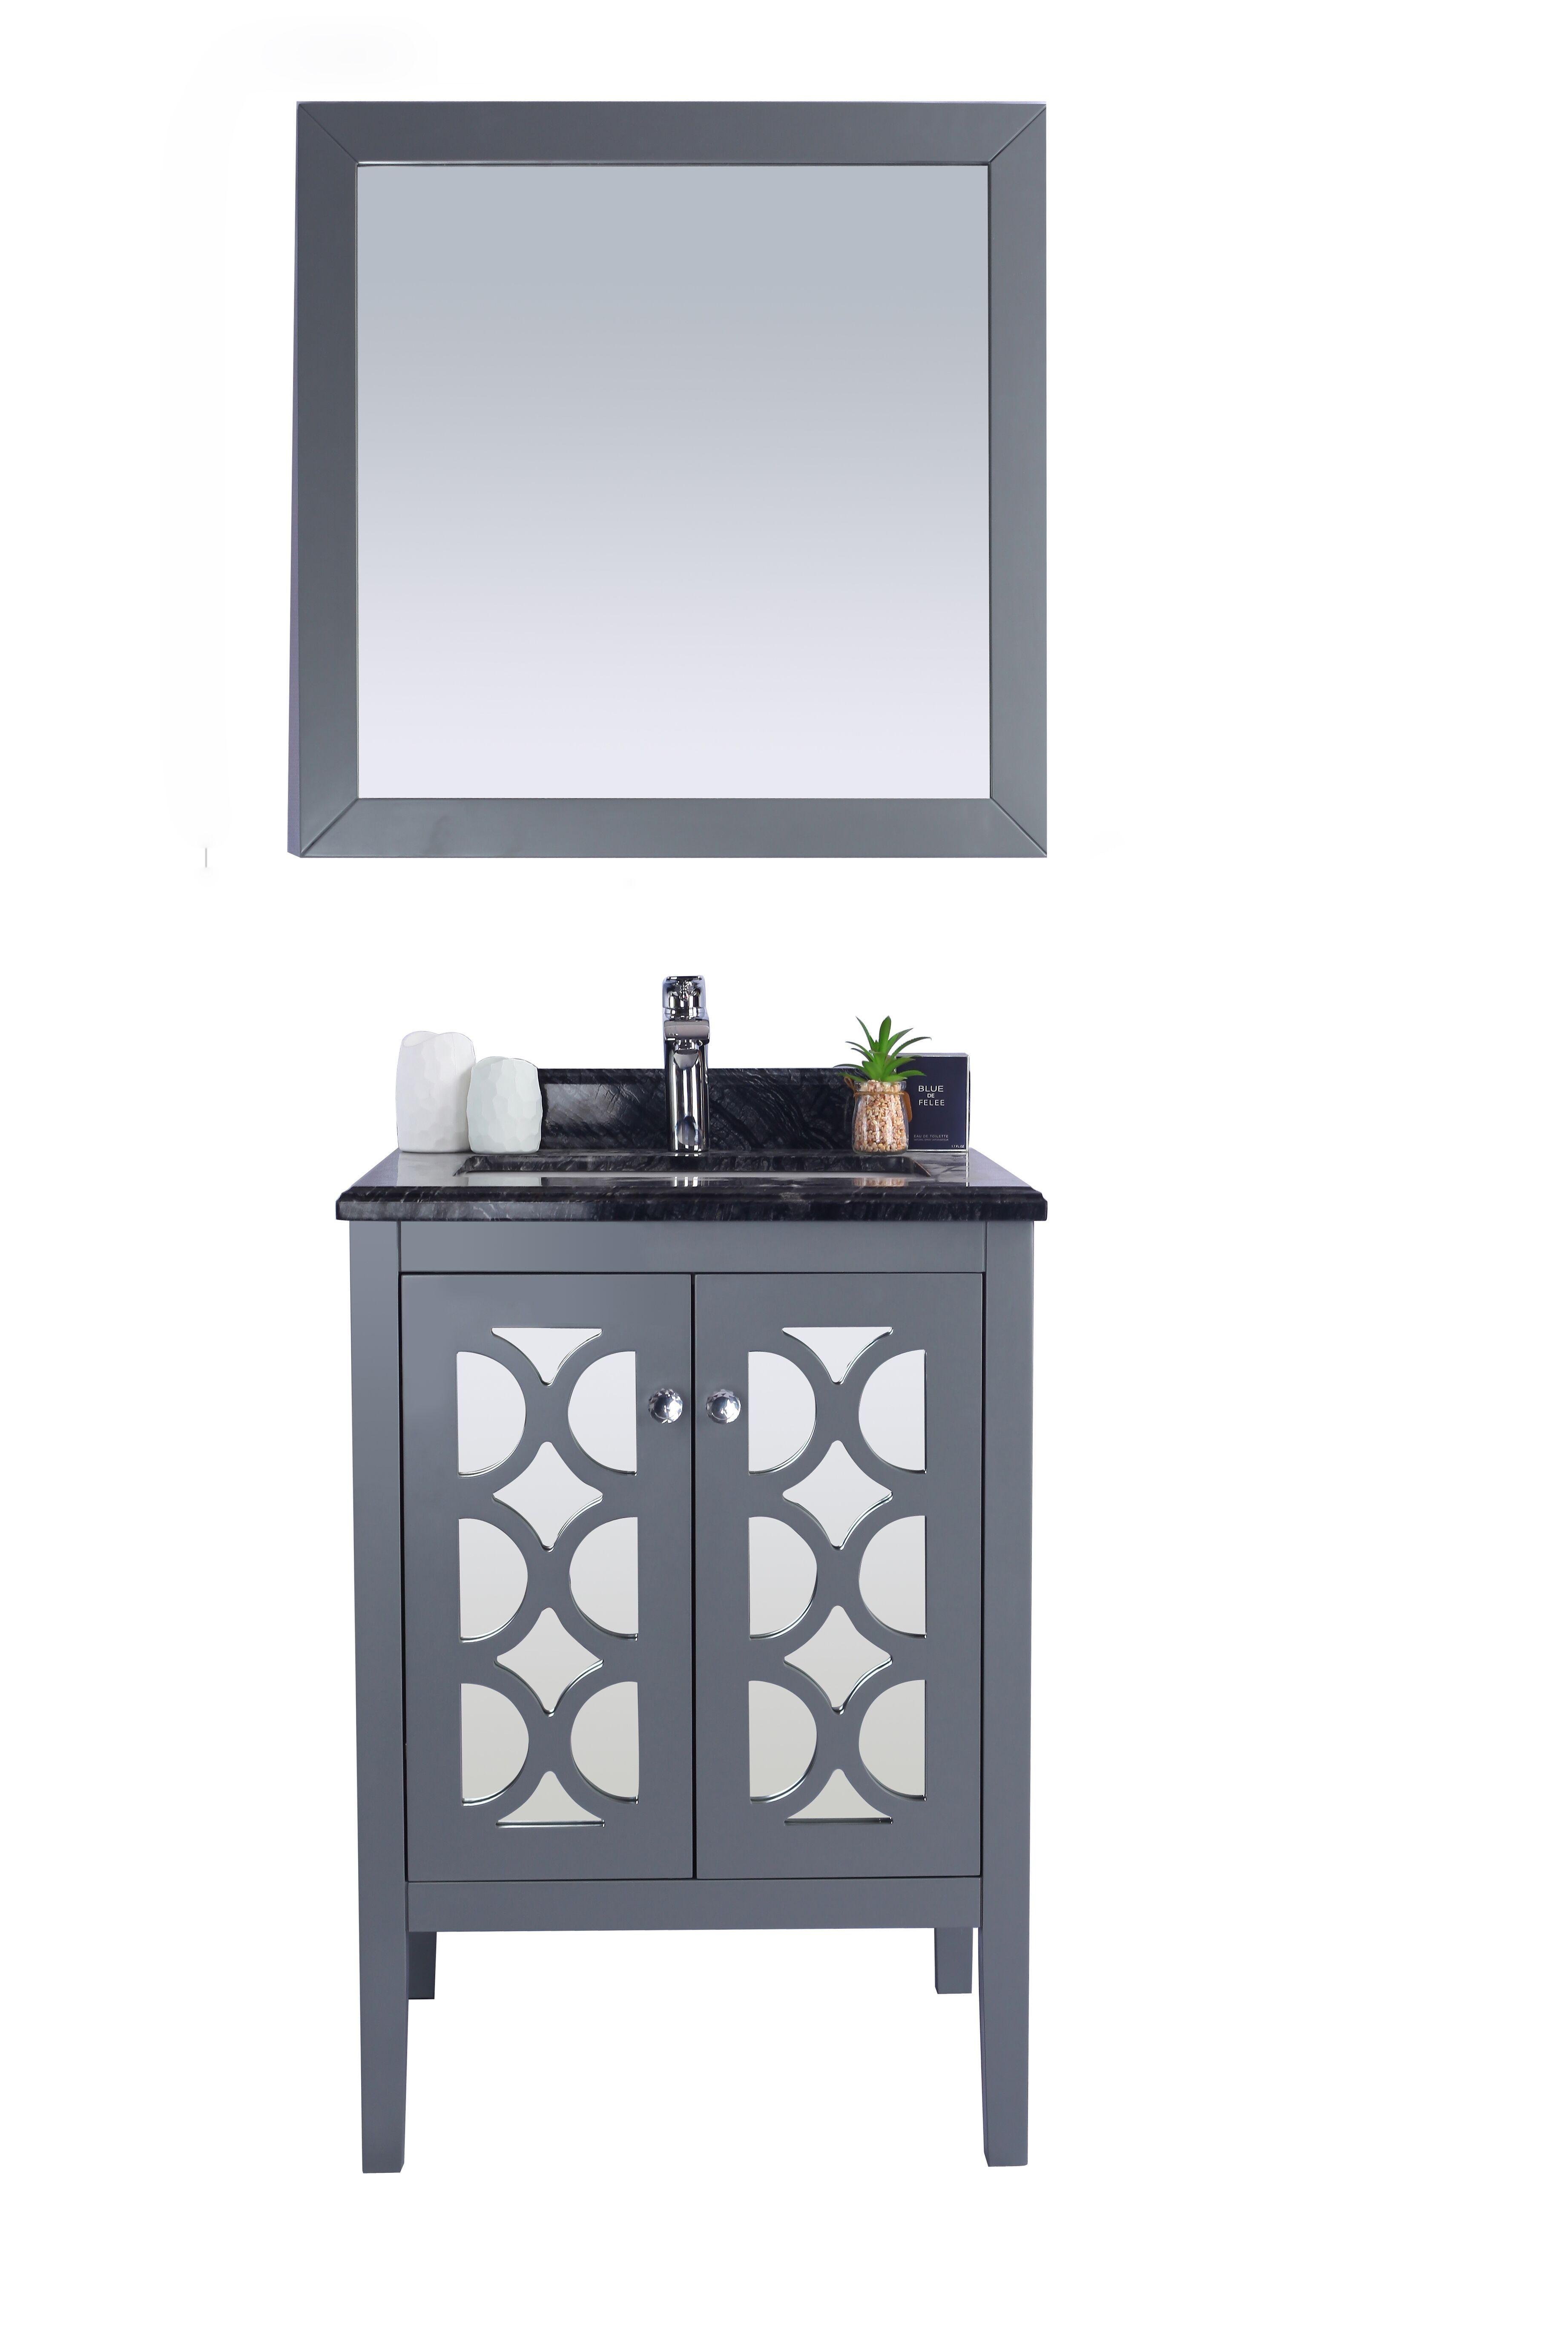 24" Single Bathroom Vanity Cabinet with Top and Color Options